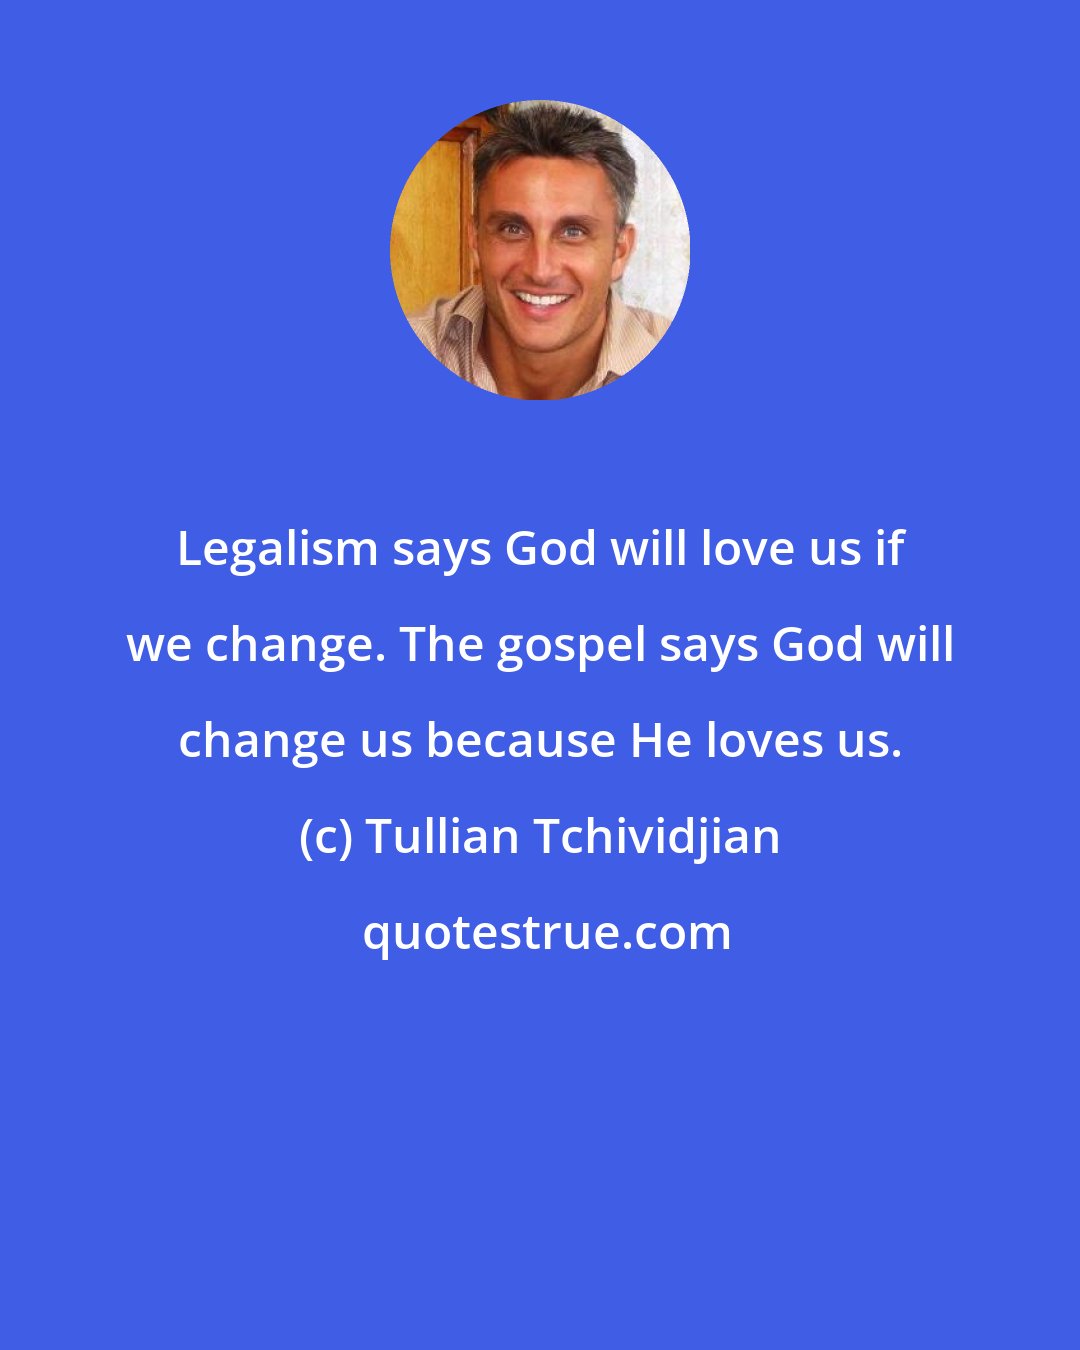 Tullian Tchividjian: Legalism says God will love us if we change. The gospel says God will change us because He loves us.